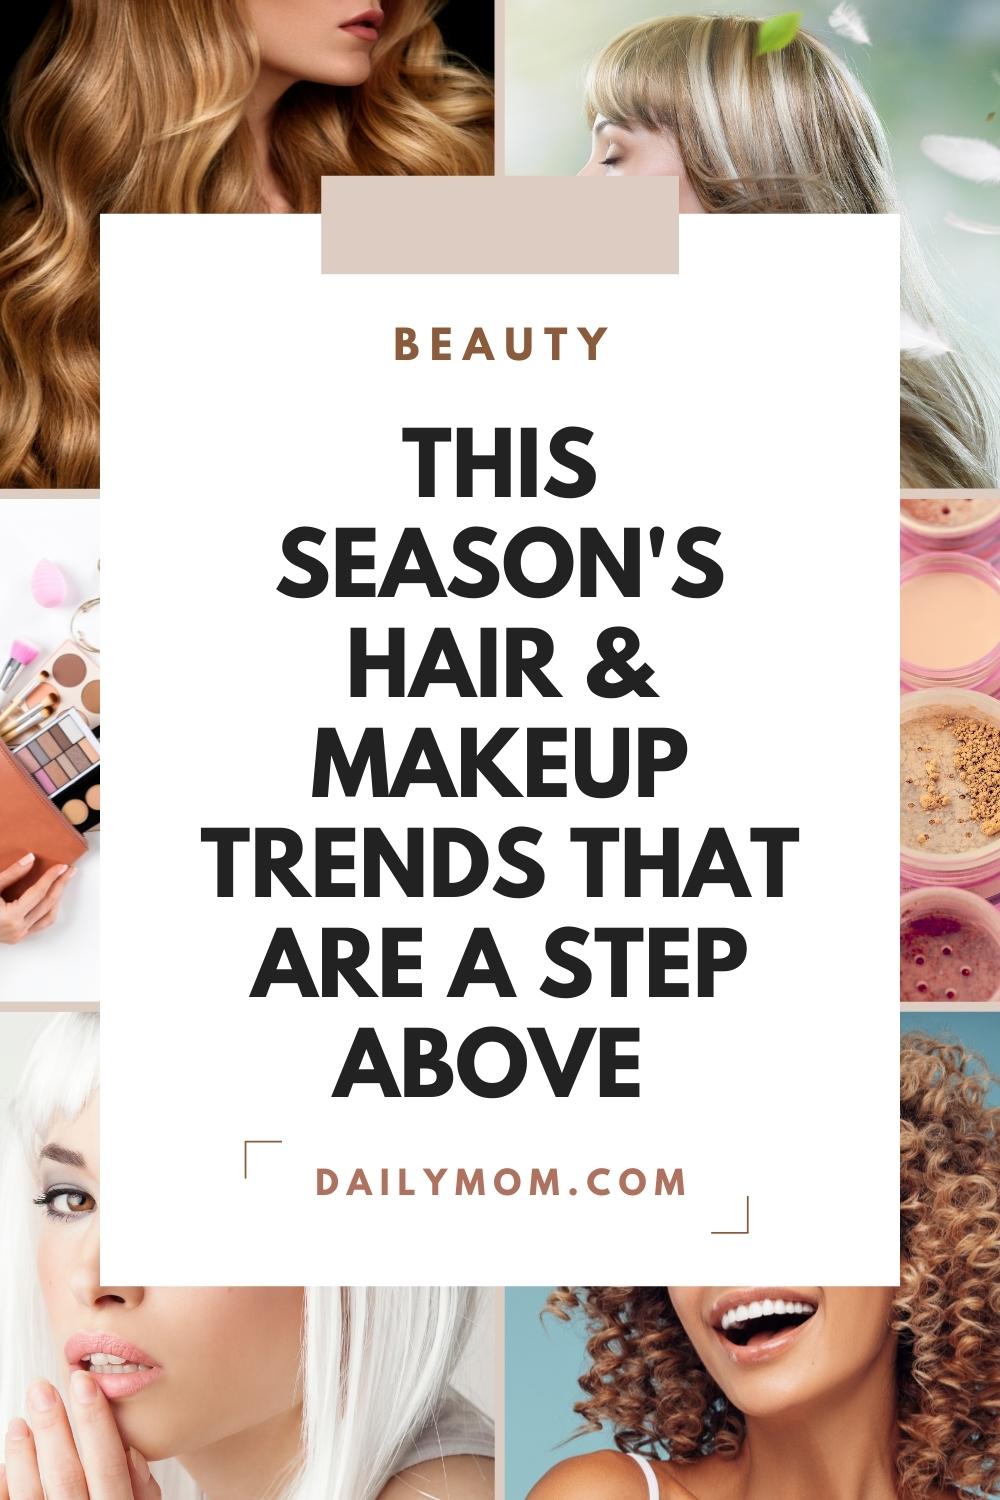 20 Makeup And Hair Must-haves For The Latest Looks & Soft-n-healthy Hair